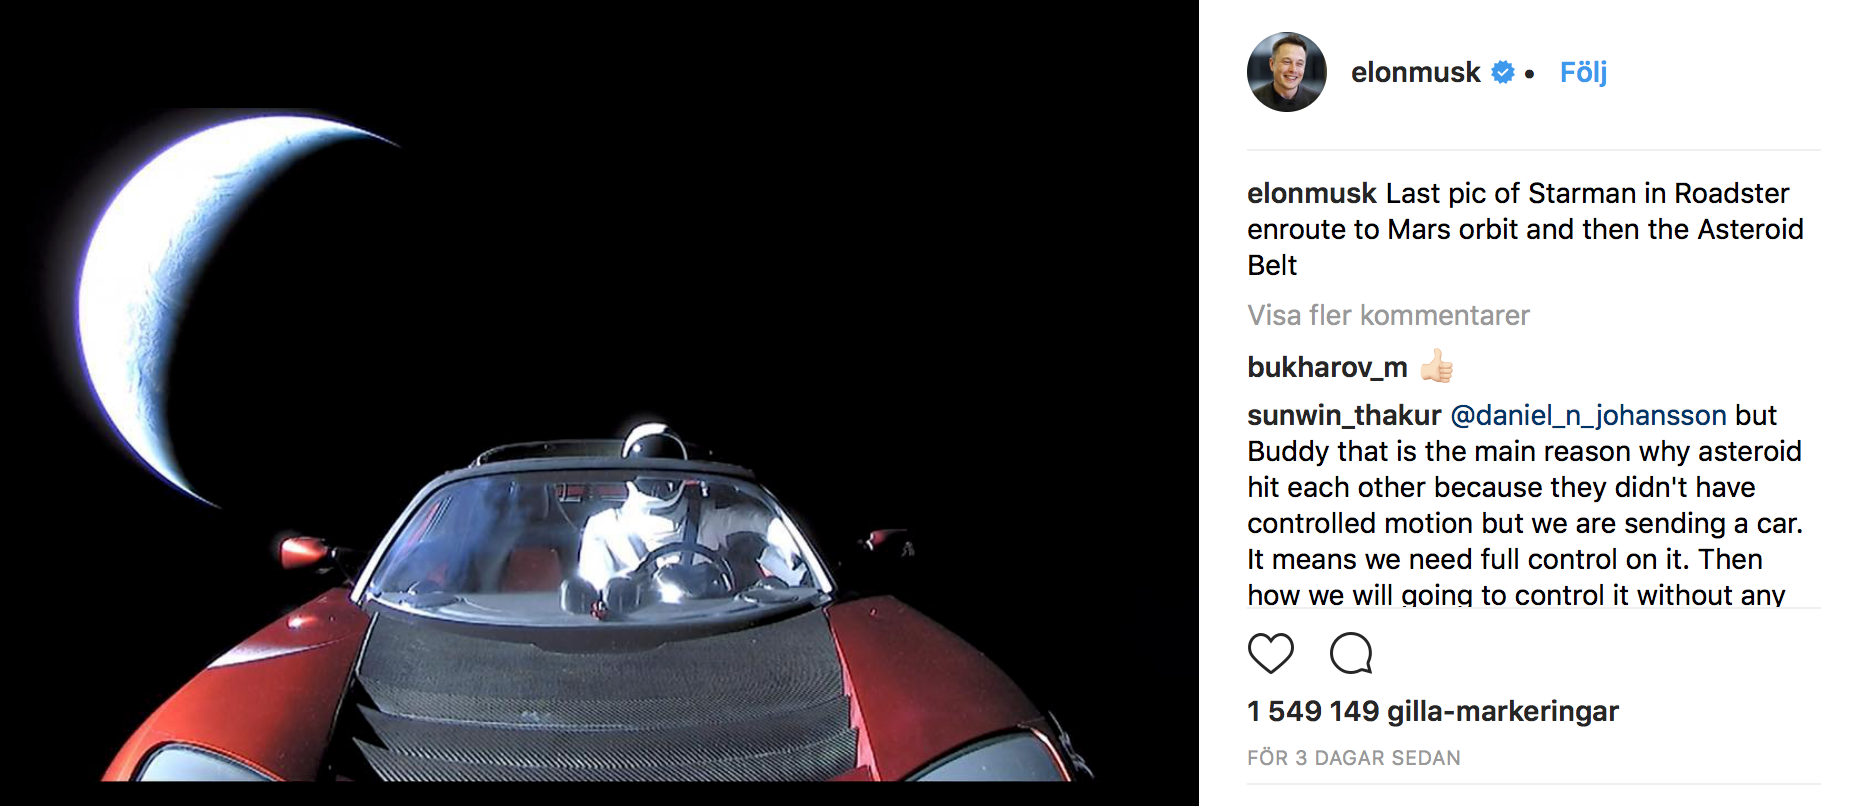 Last pic of Starman in Roadster enroute to Mars orbit and then the Asteroid Belt - Elon Musk